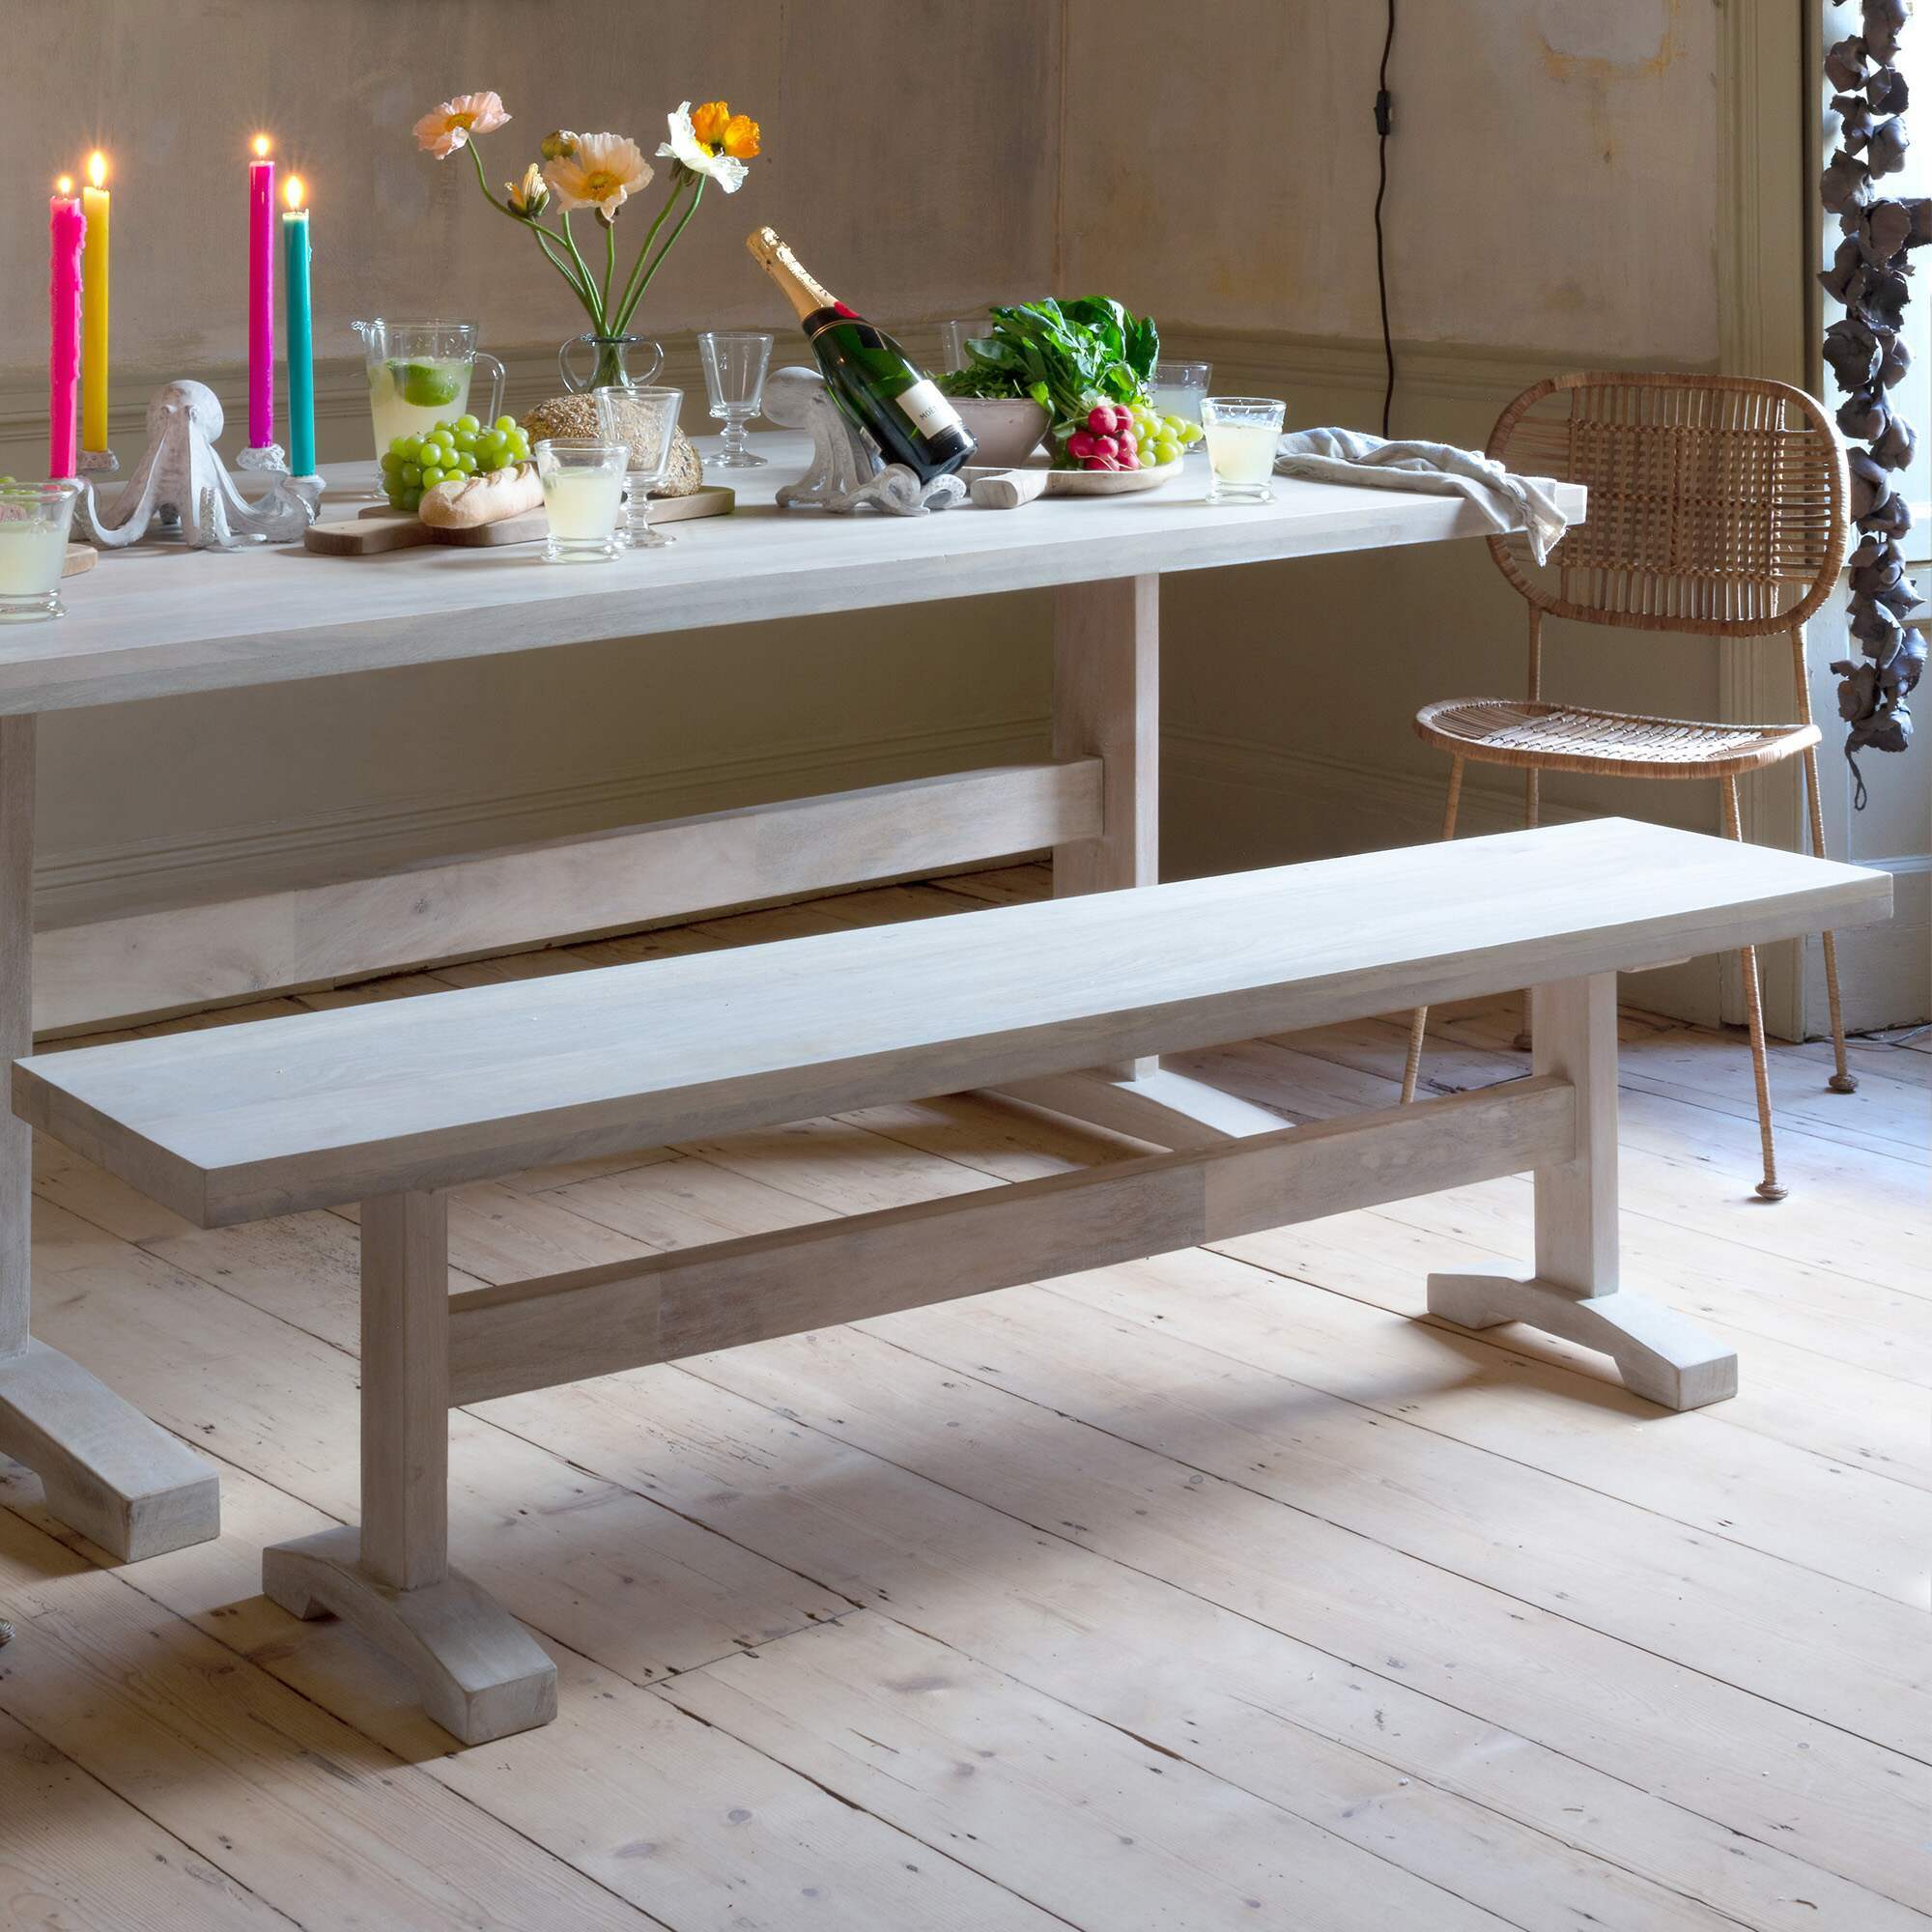 Read more about Graham and green abelline dining bench